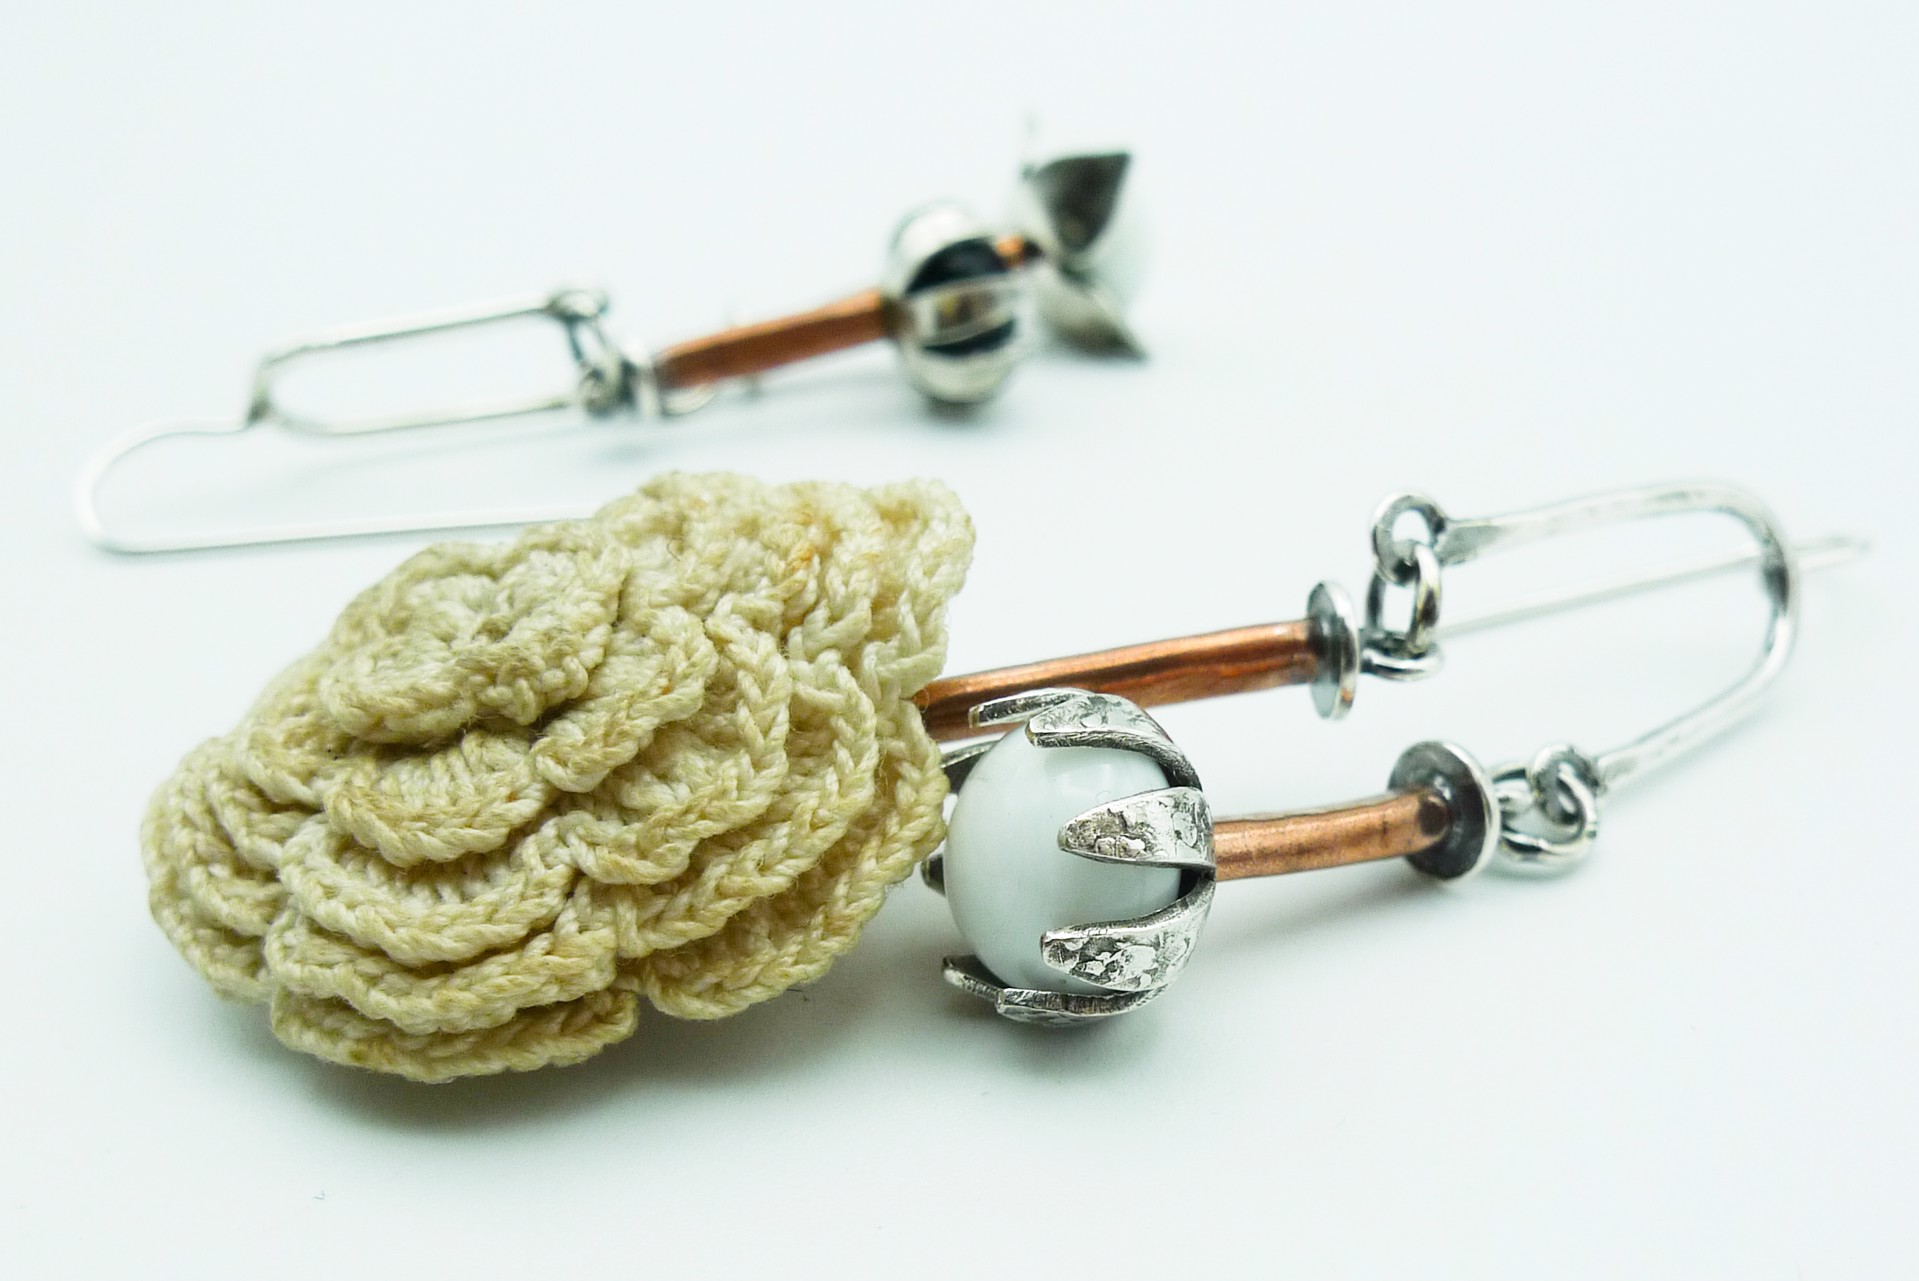 From Hair to Ear Antique Hat Pin Adornments by Ali Kauss